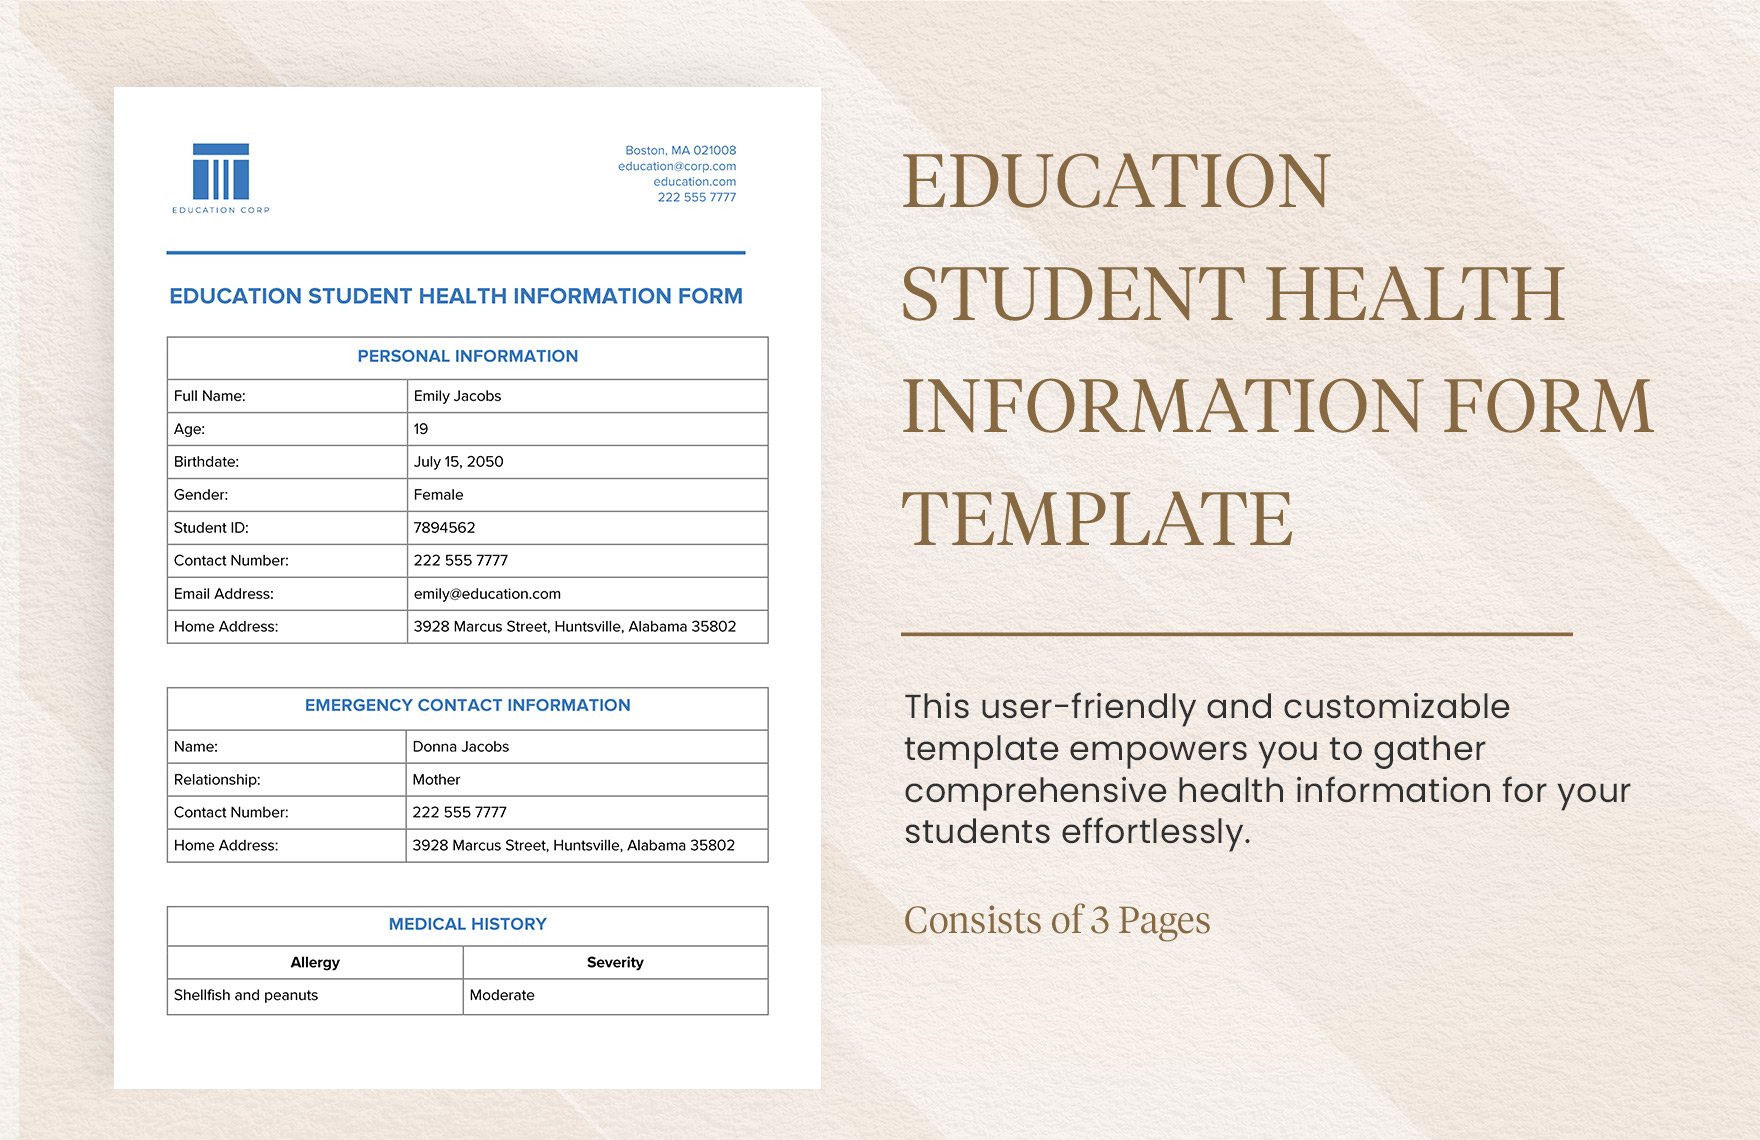 Education Student Health Information Form Template in Word, Google Docs, PDF